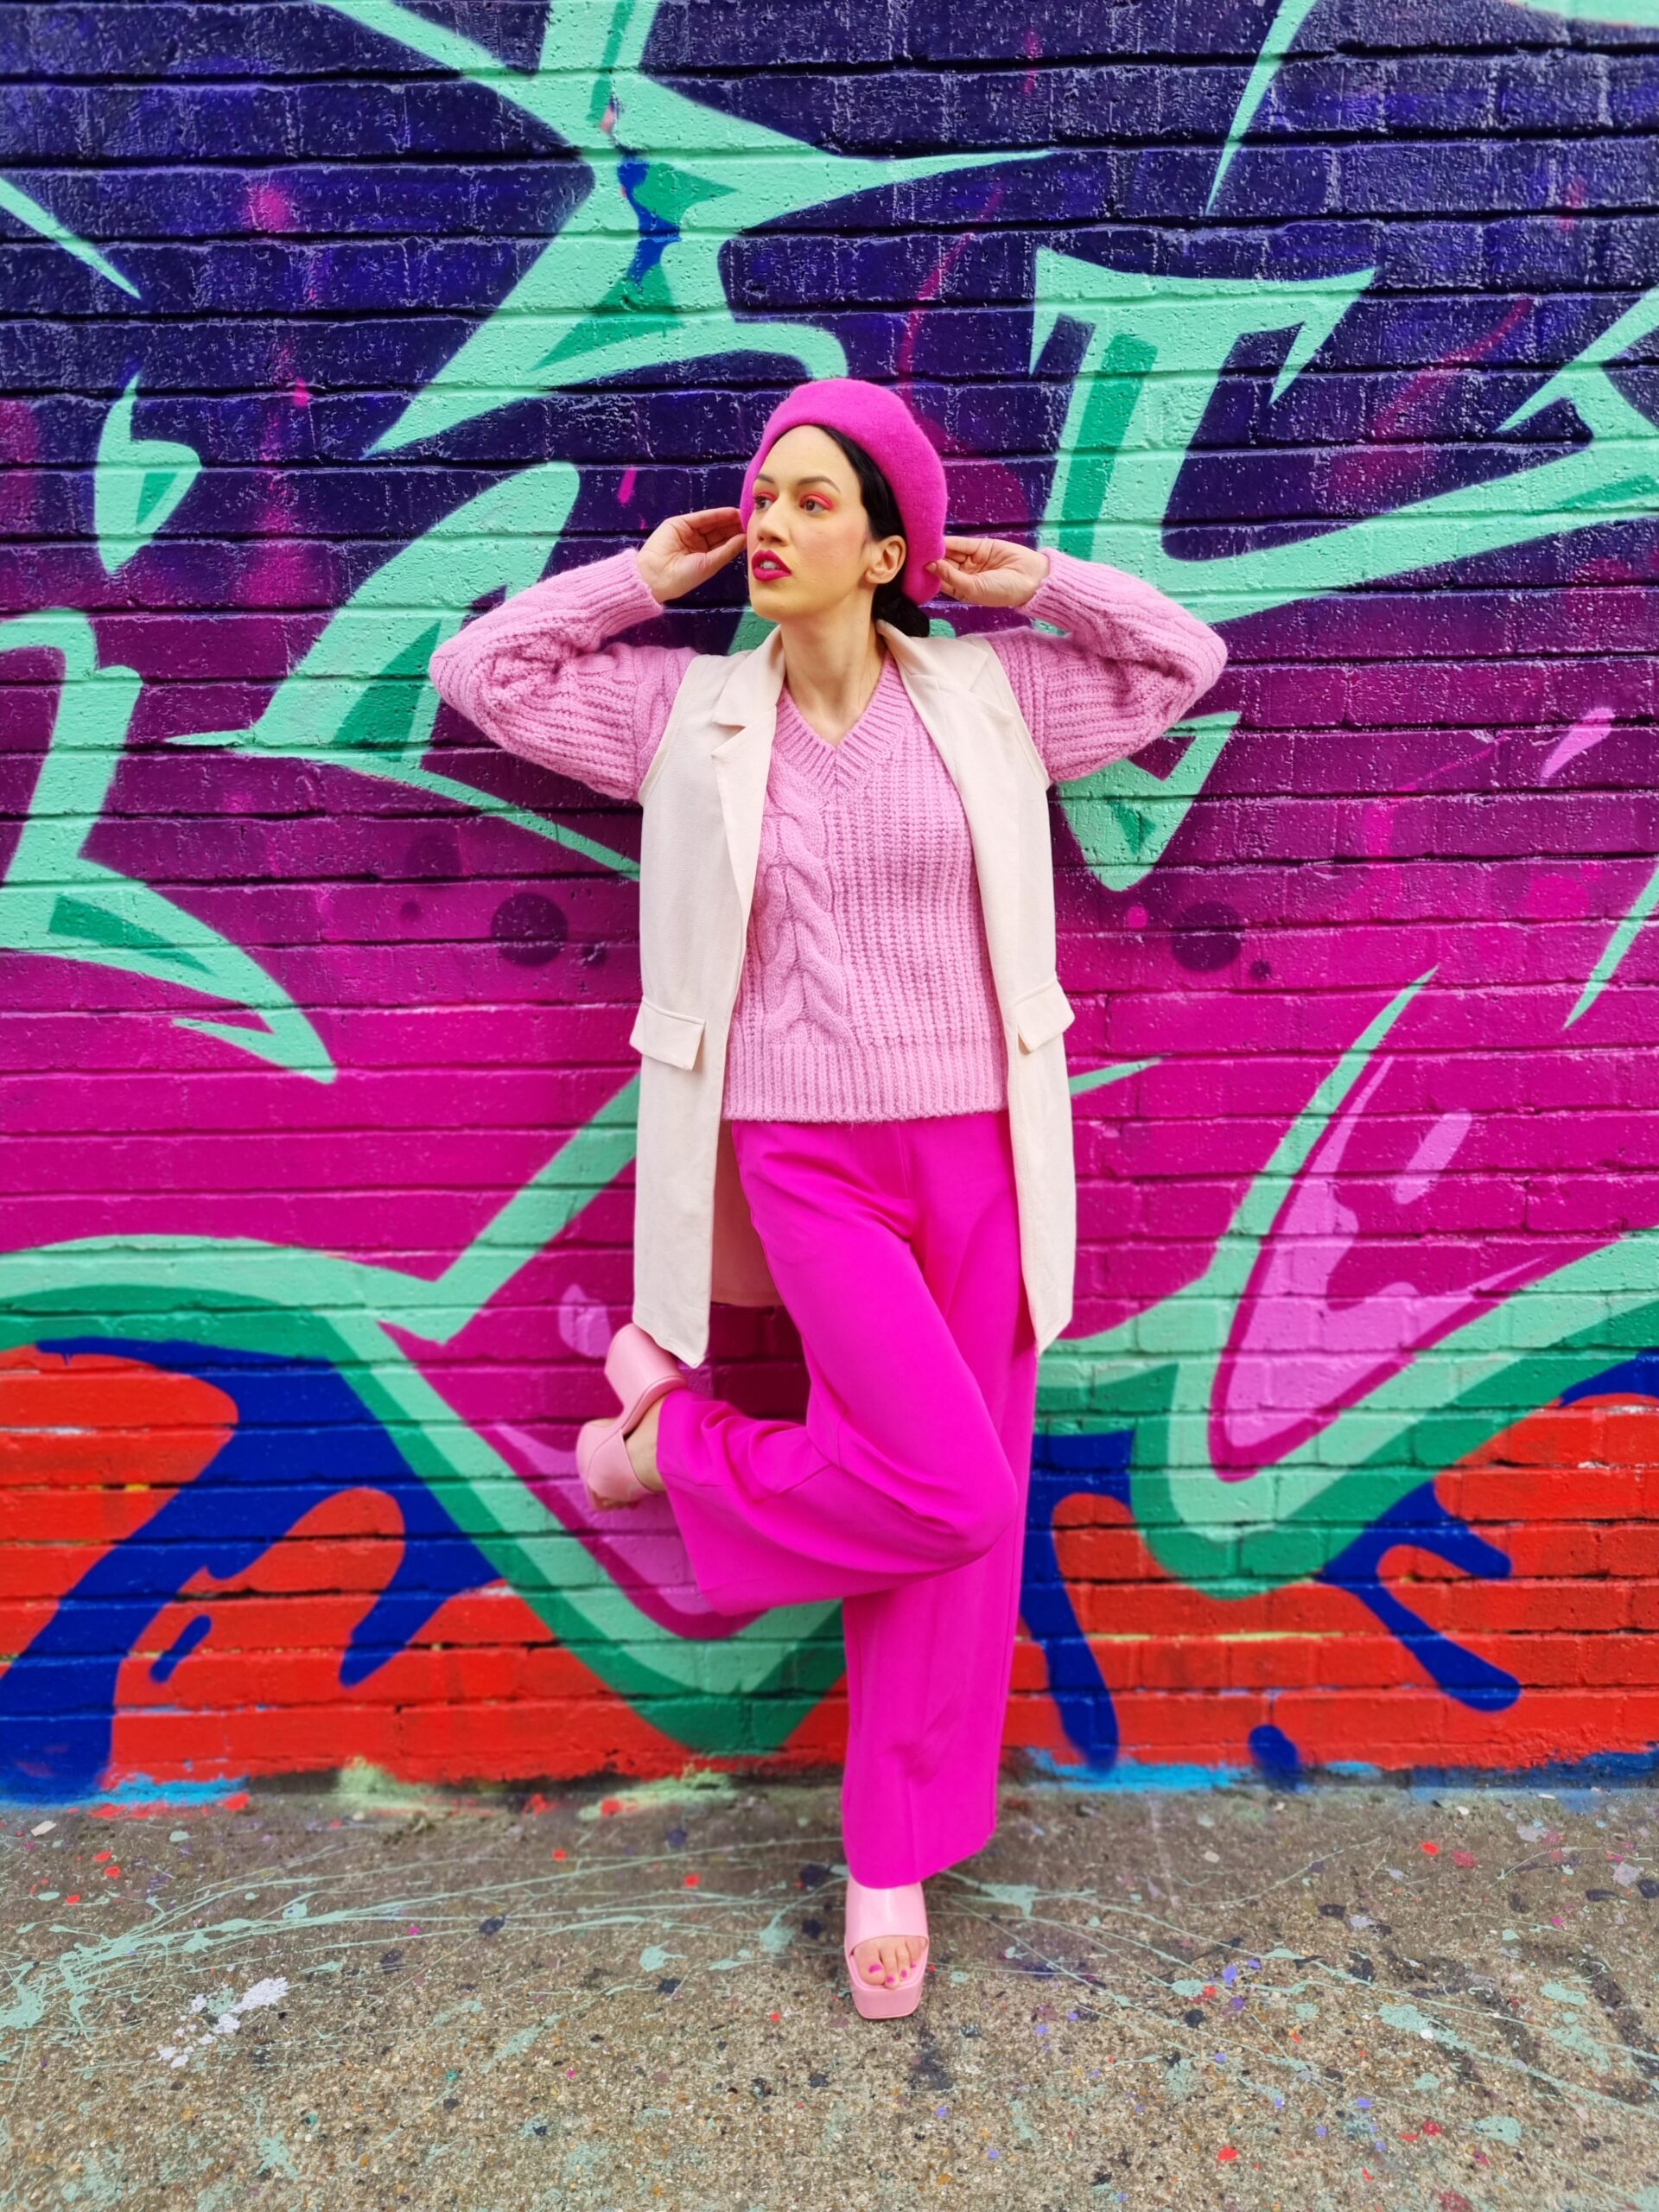 <img src="ana.jpg" alt="ana in pink colourful clothes and trousers"/>